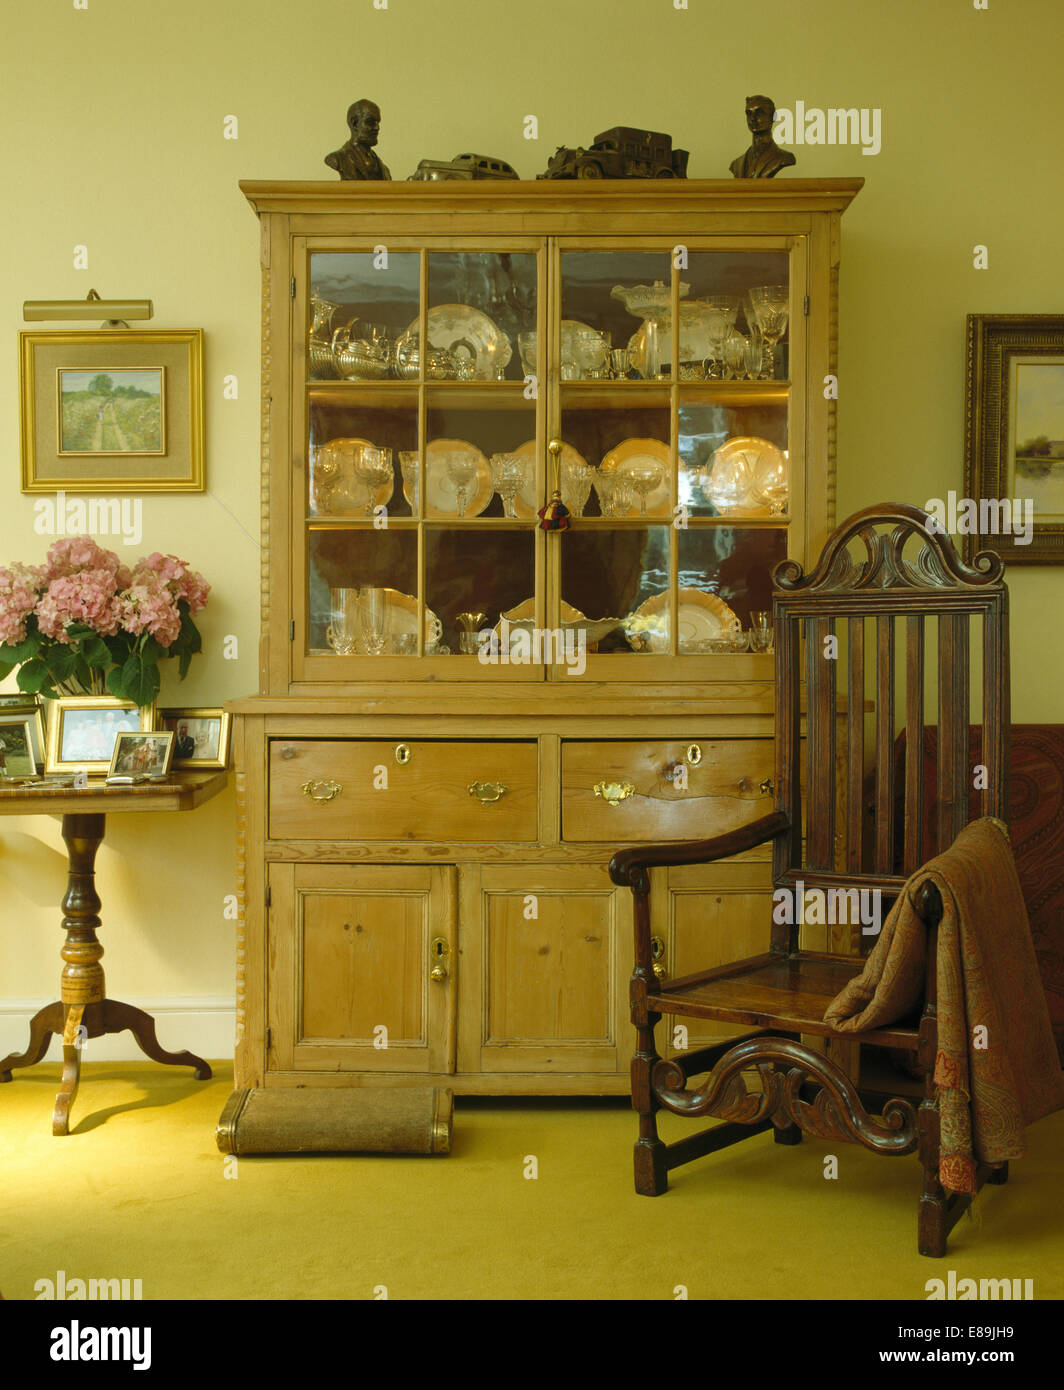 Antique Pine Dresser And Oak Chair In Country Dining Room Stock